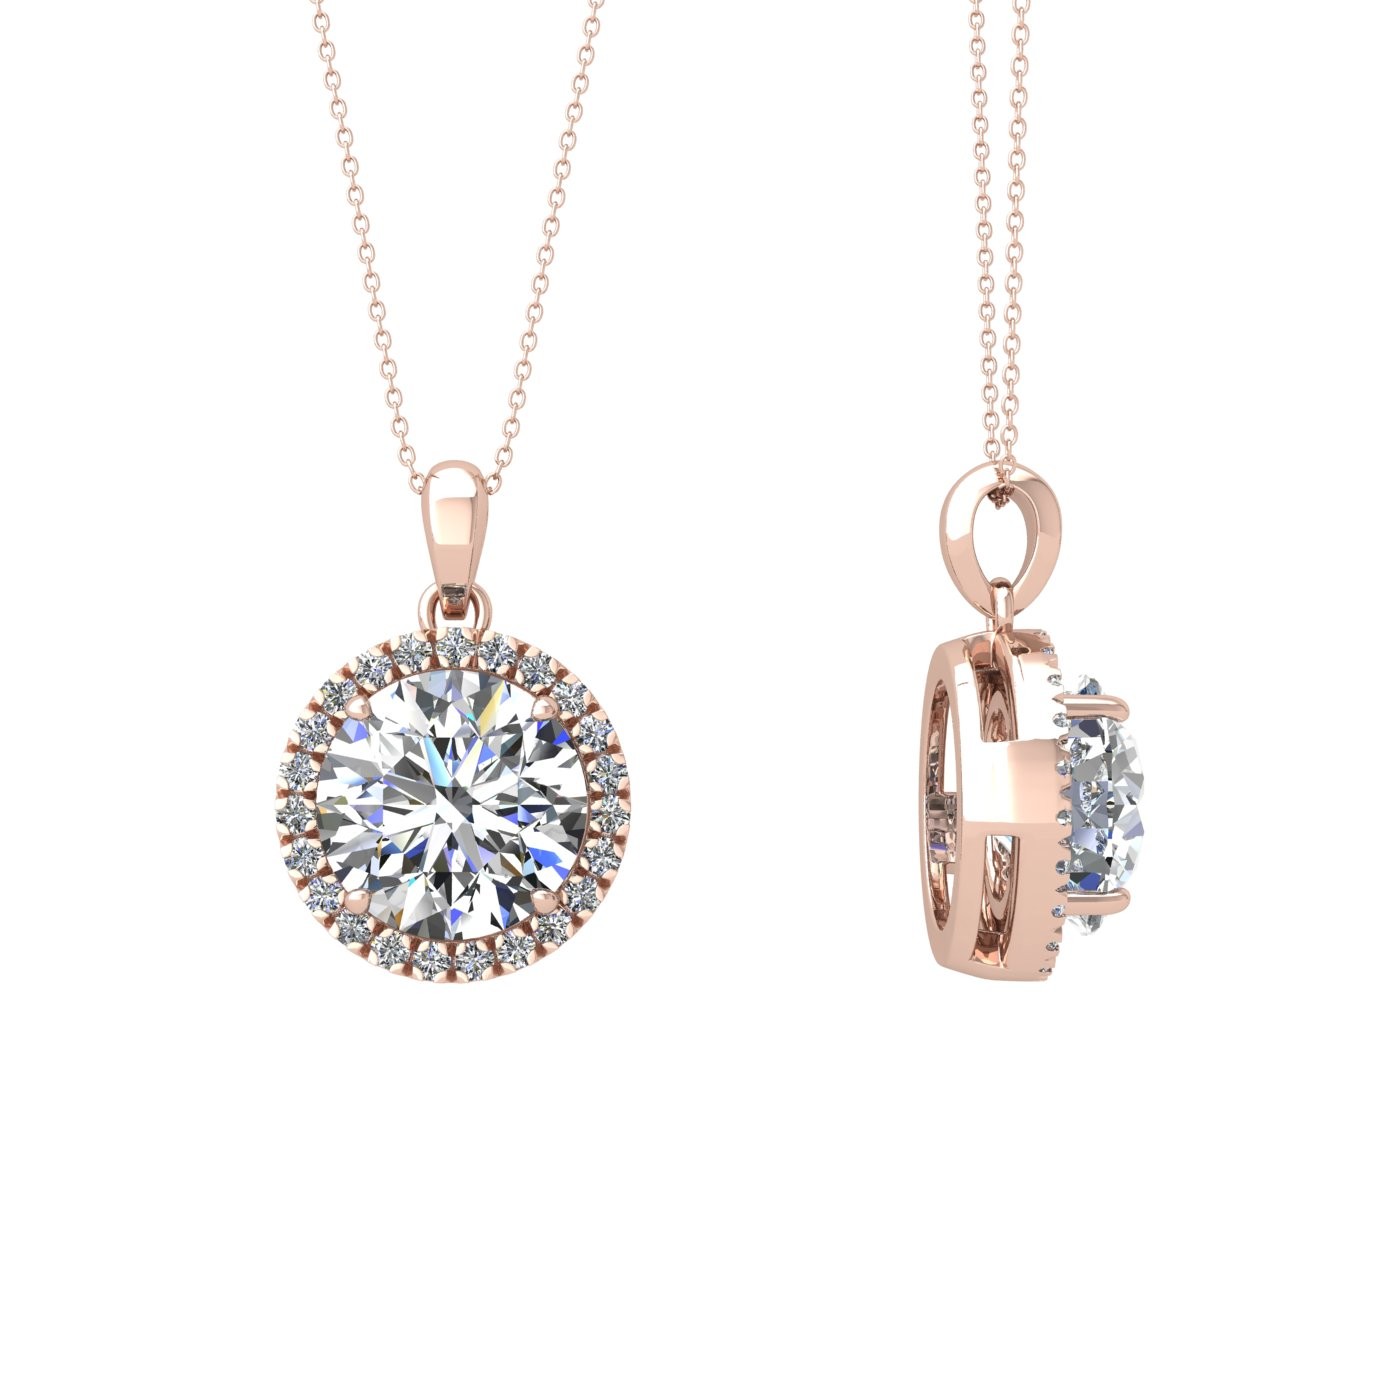 18k rose gold  0,3 ct 4 prong round shape diamond pendant with diamond pavÉ set halo including chain seperate from the pendant Photos & images